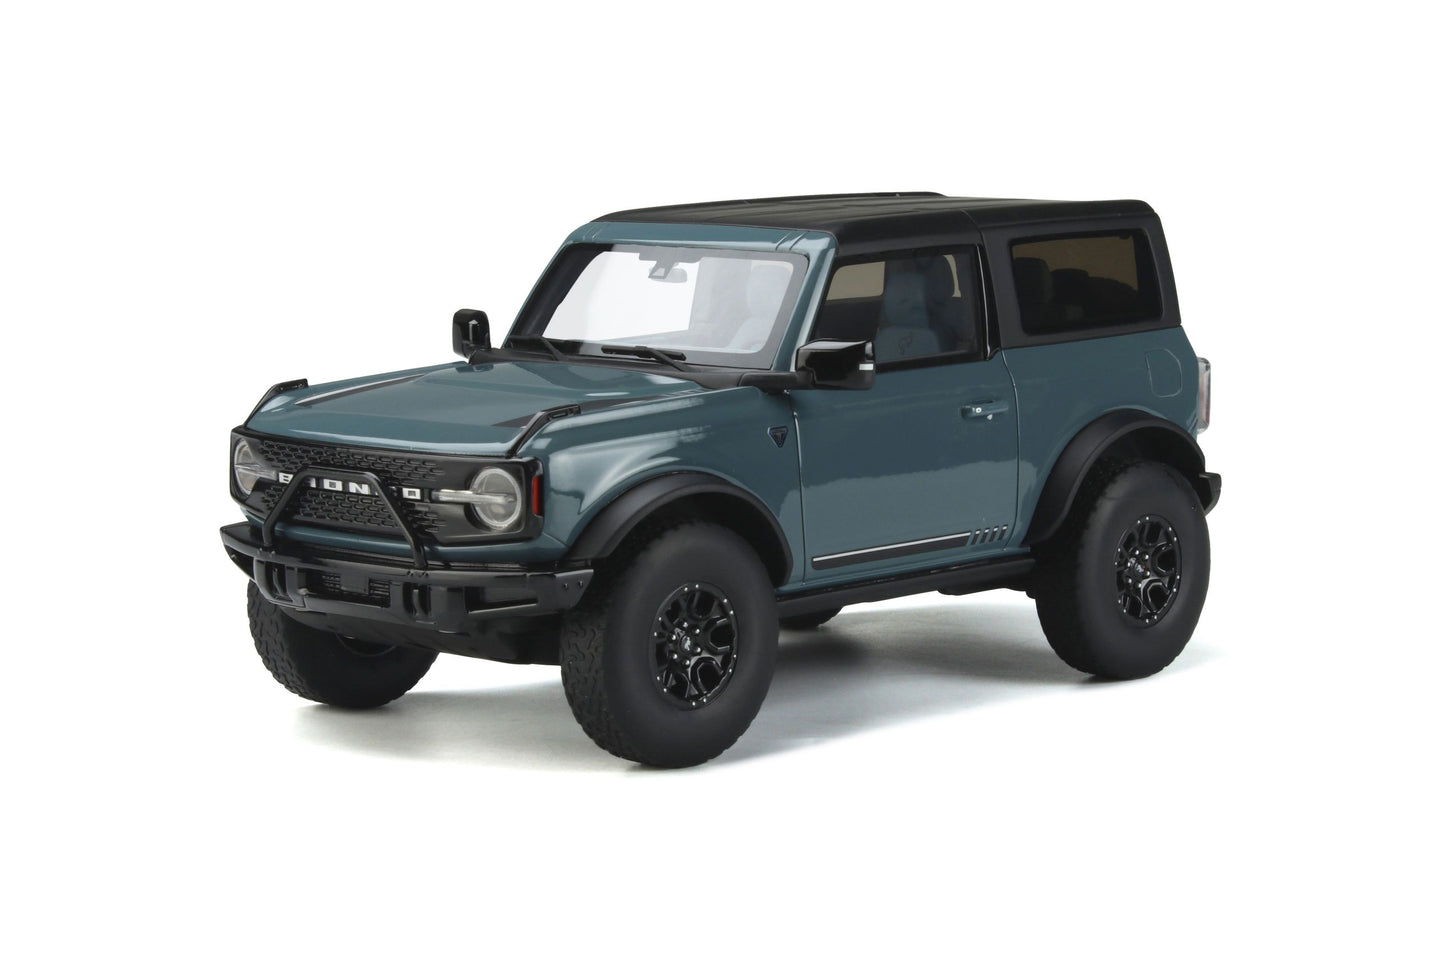 GT Spirit - Ford Bronco First Edition (Area 51 Blue) 1:18 Scale Model Car